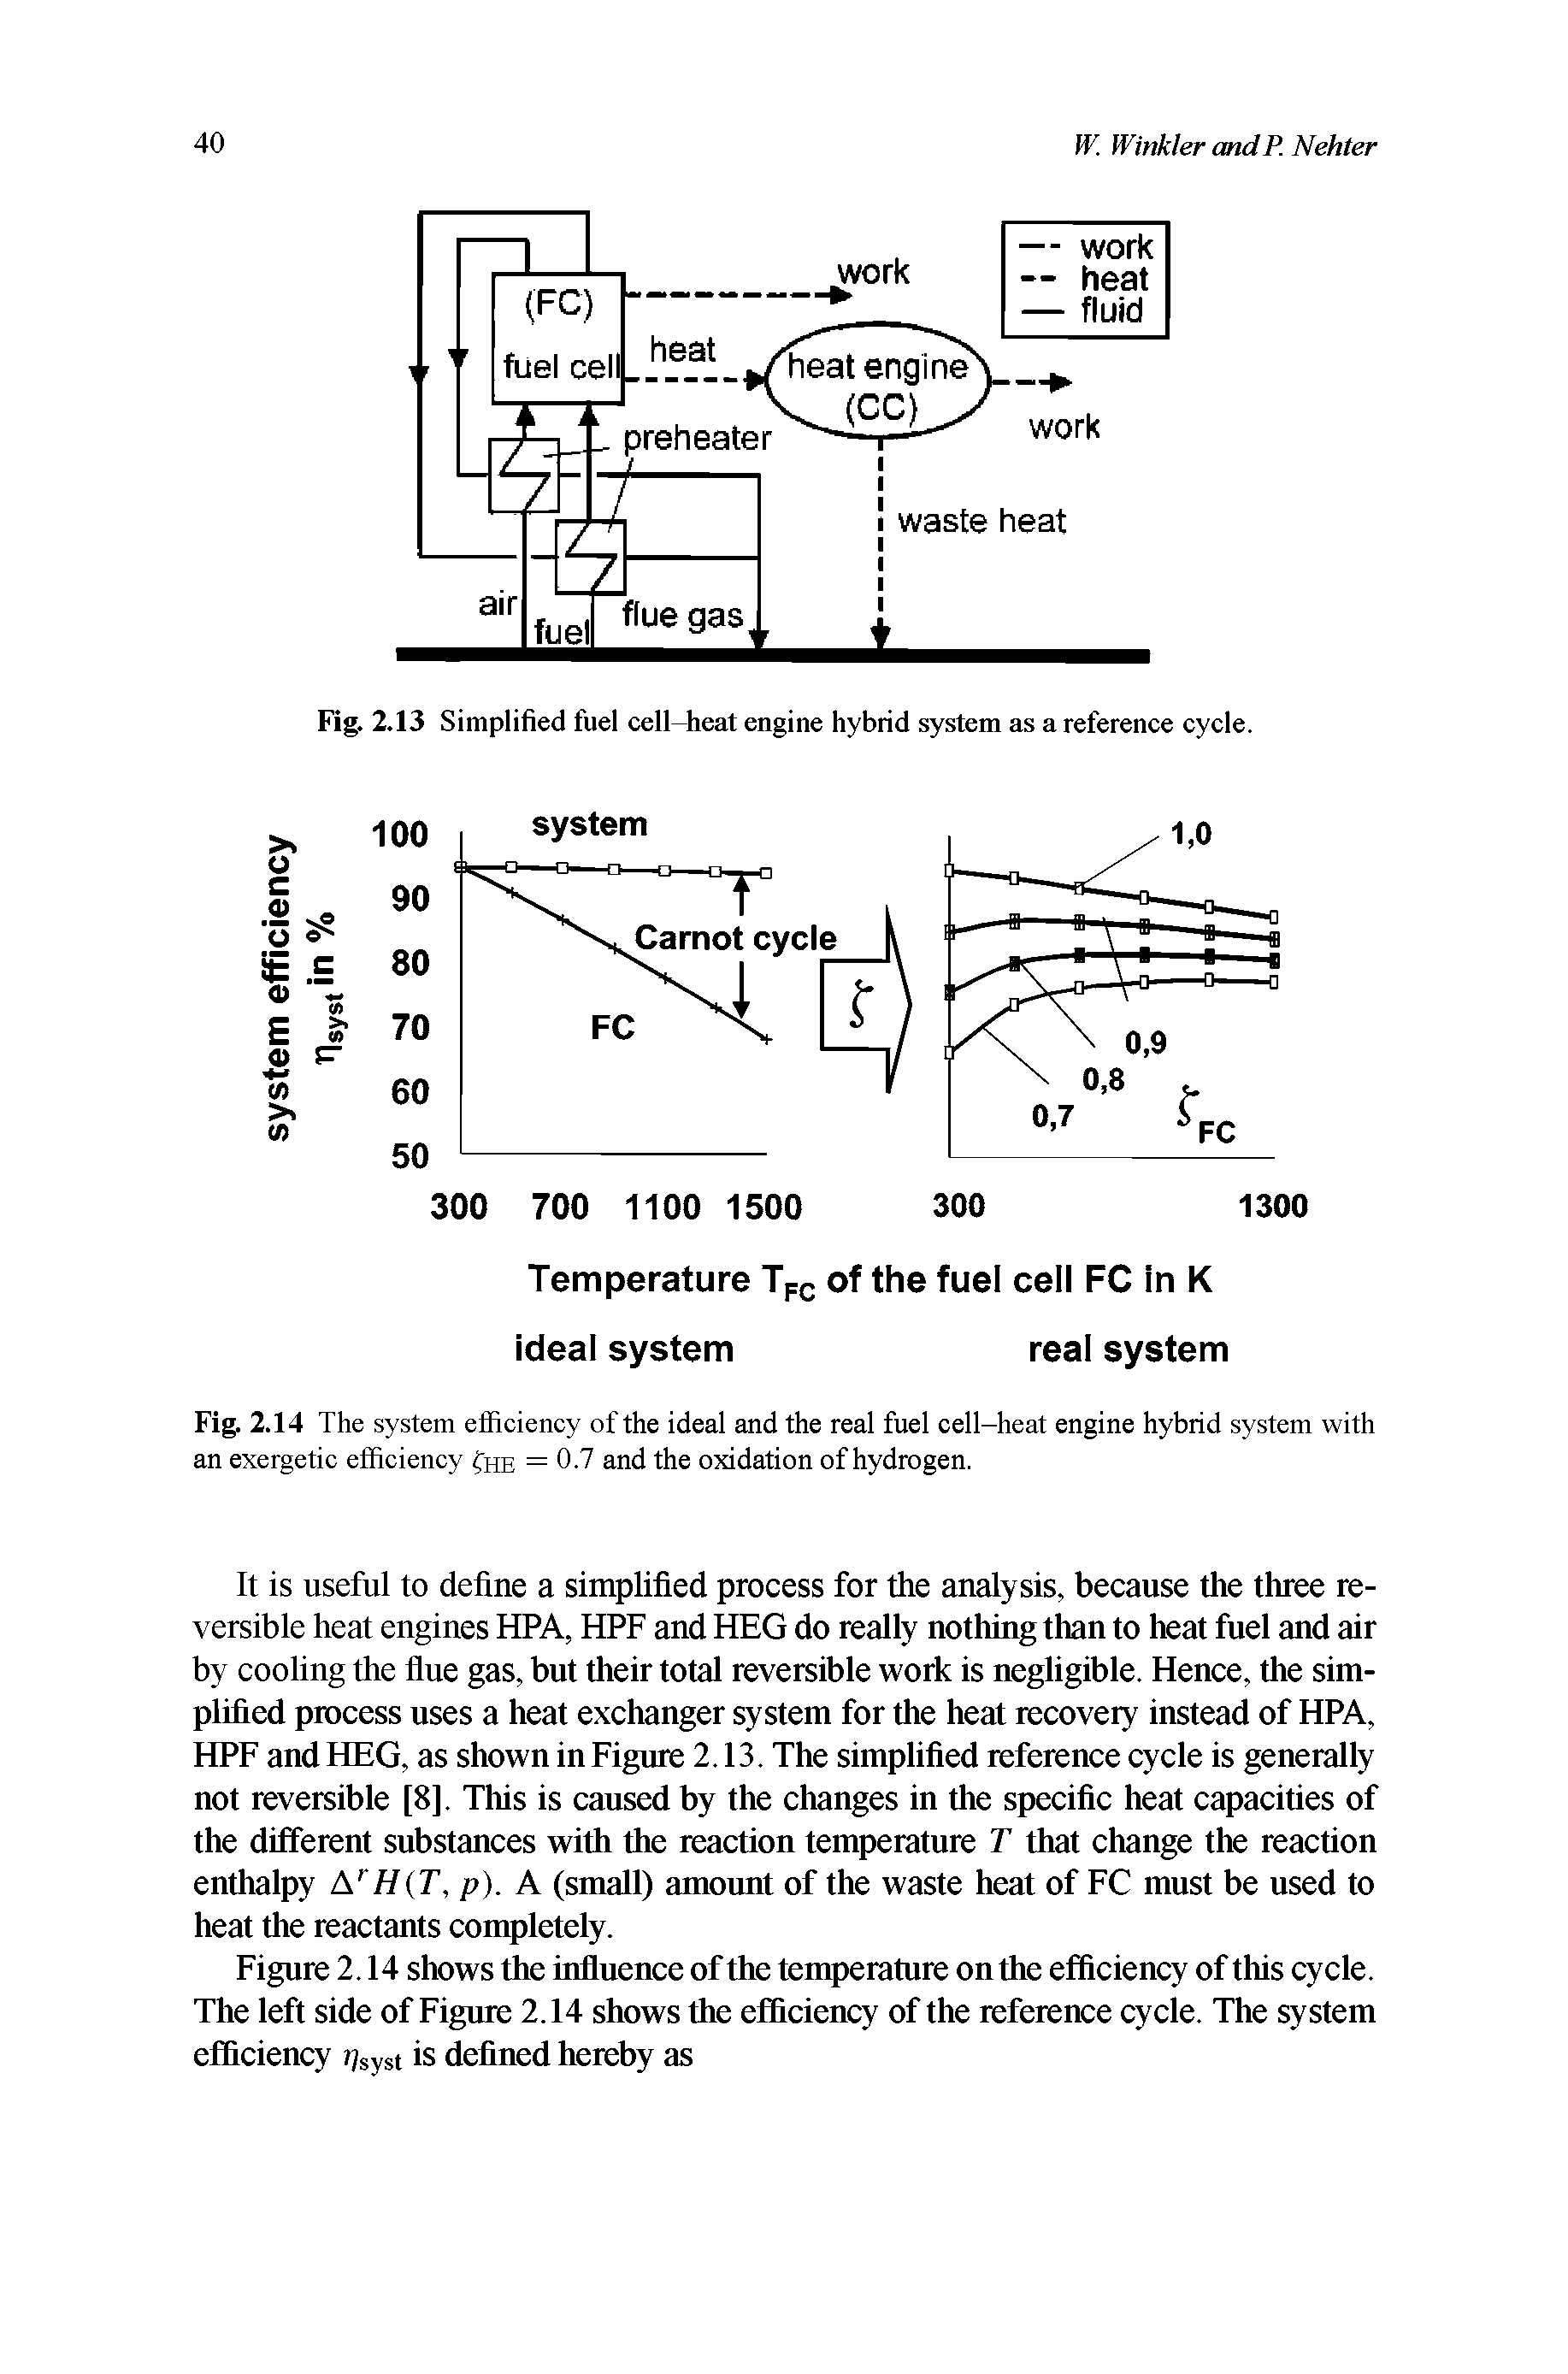 Fig. 2.13 Simplified fuel cell-heat engine hybrid system as a reference cycle.